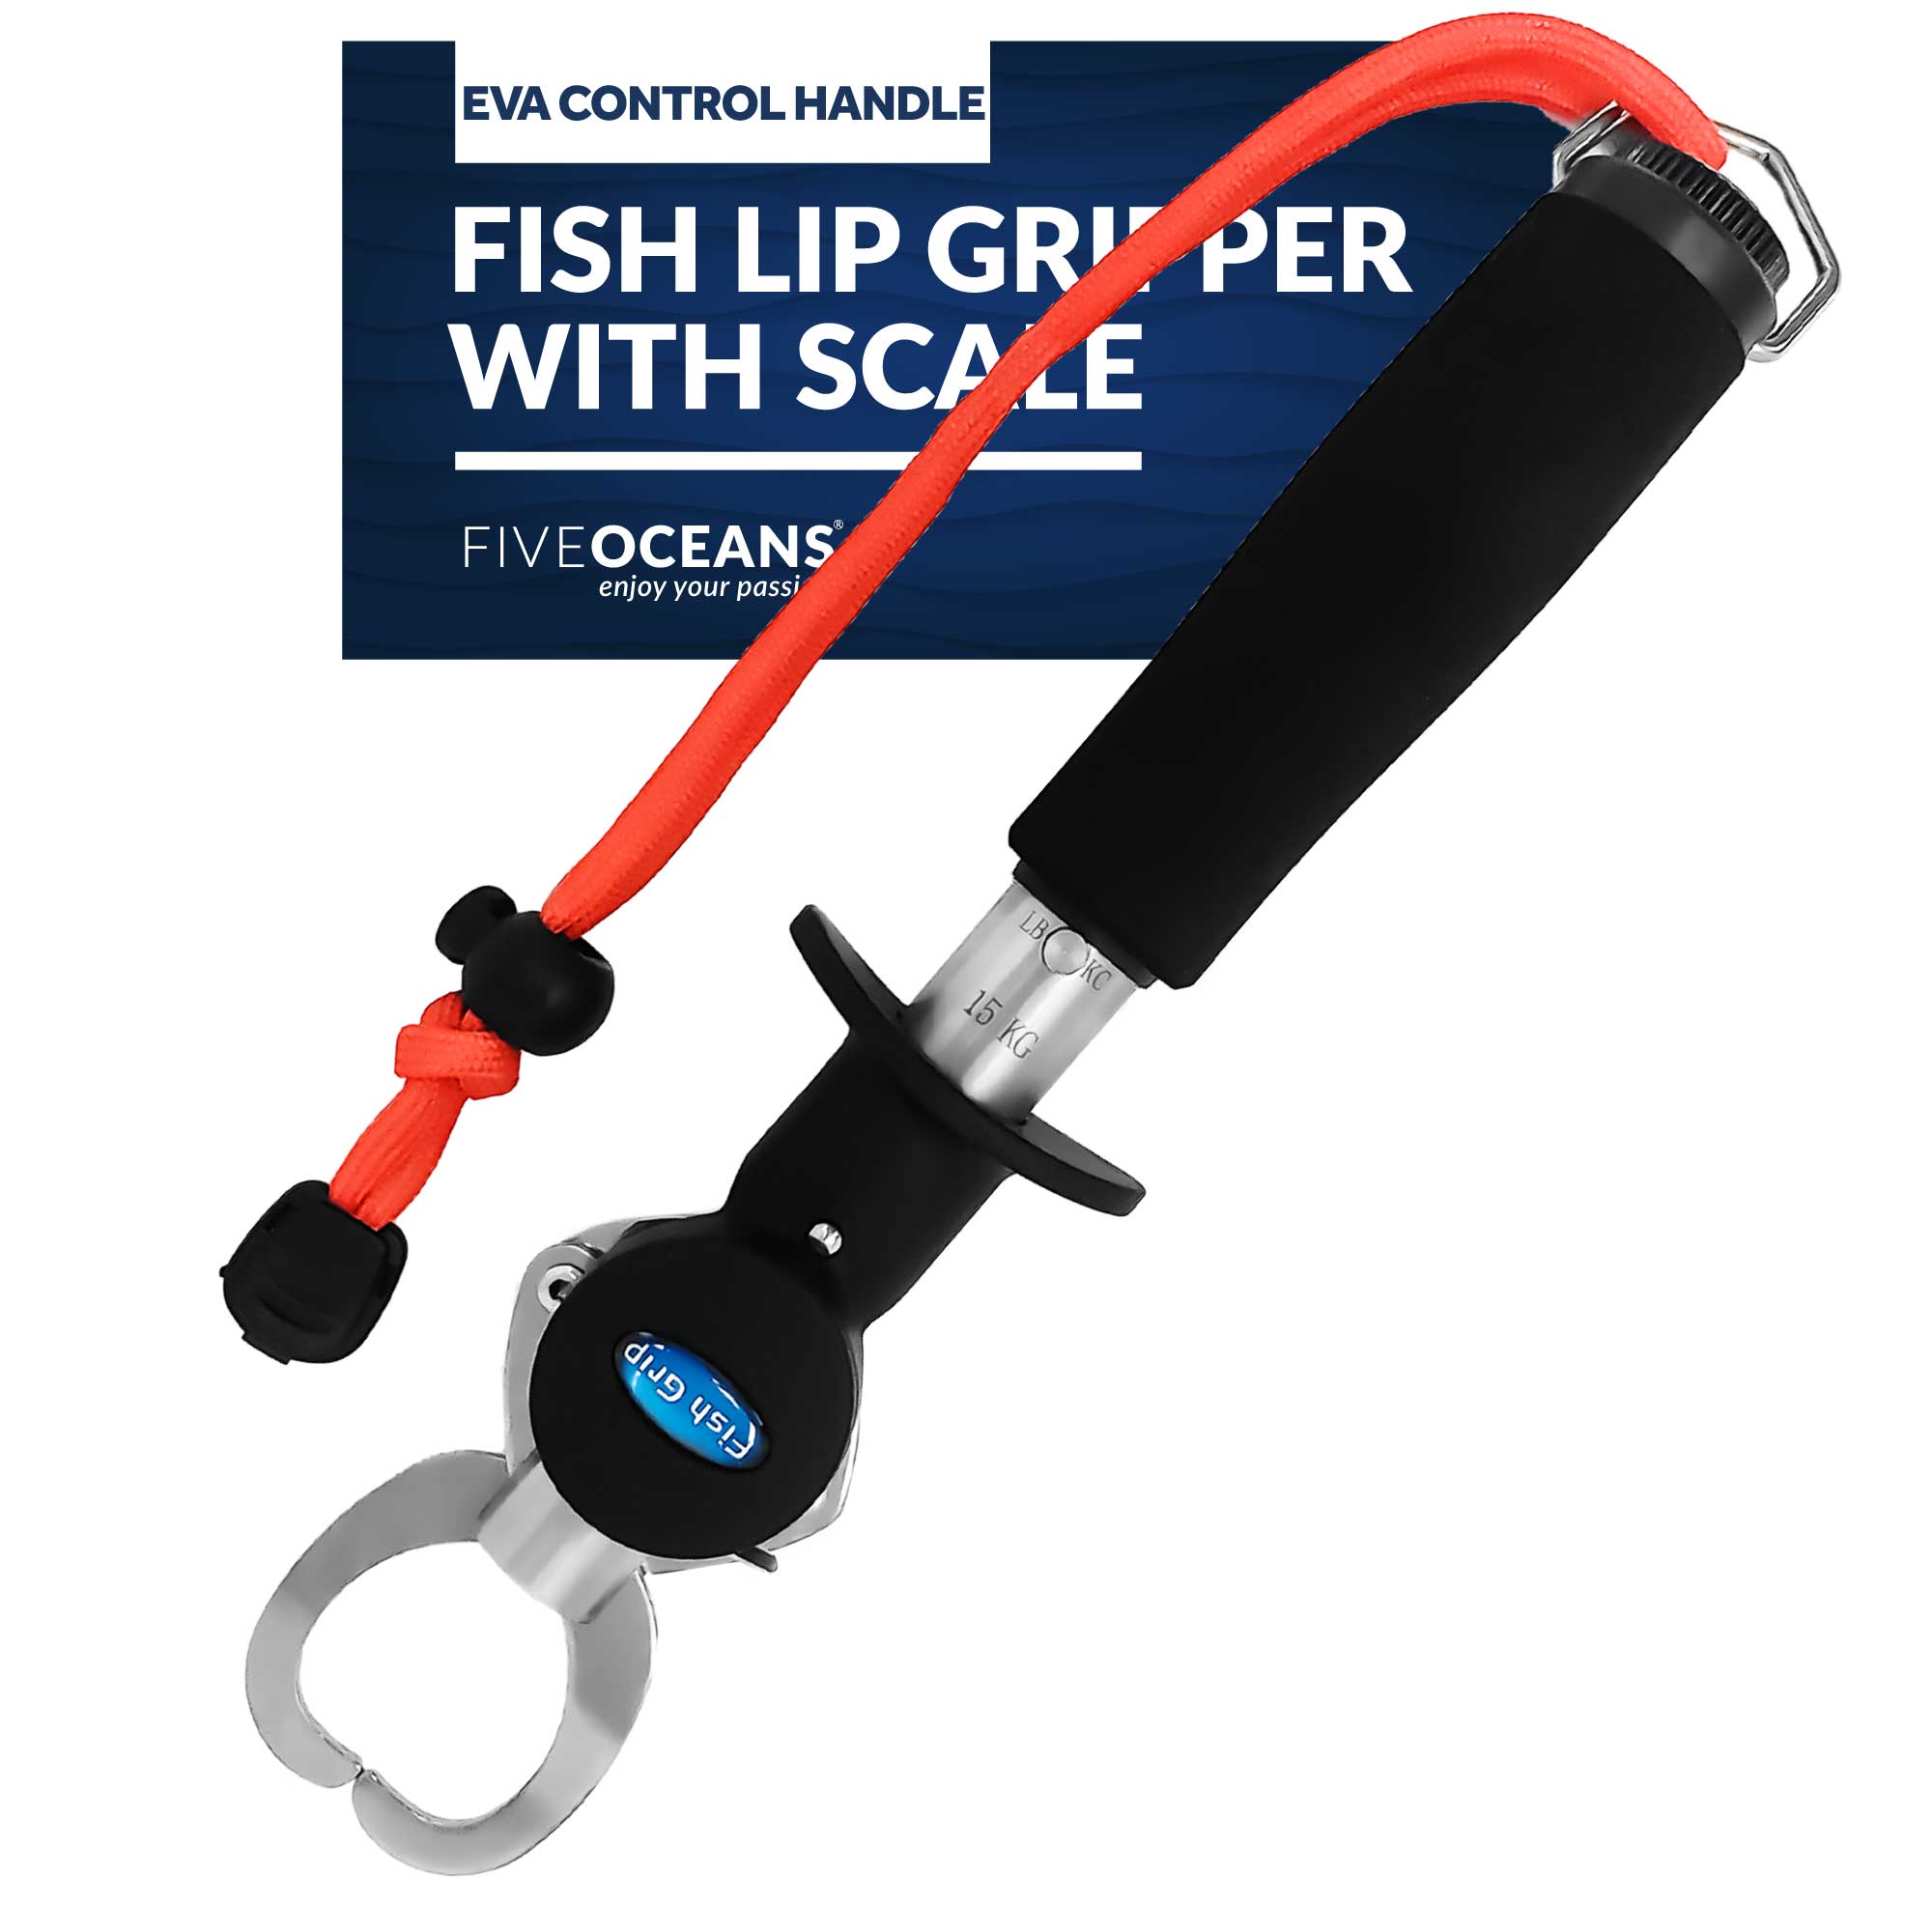 Fish Gripper, Stainless Steel Fish Gripper With Scale And Control